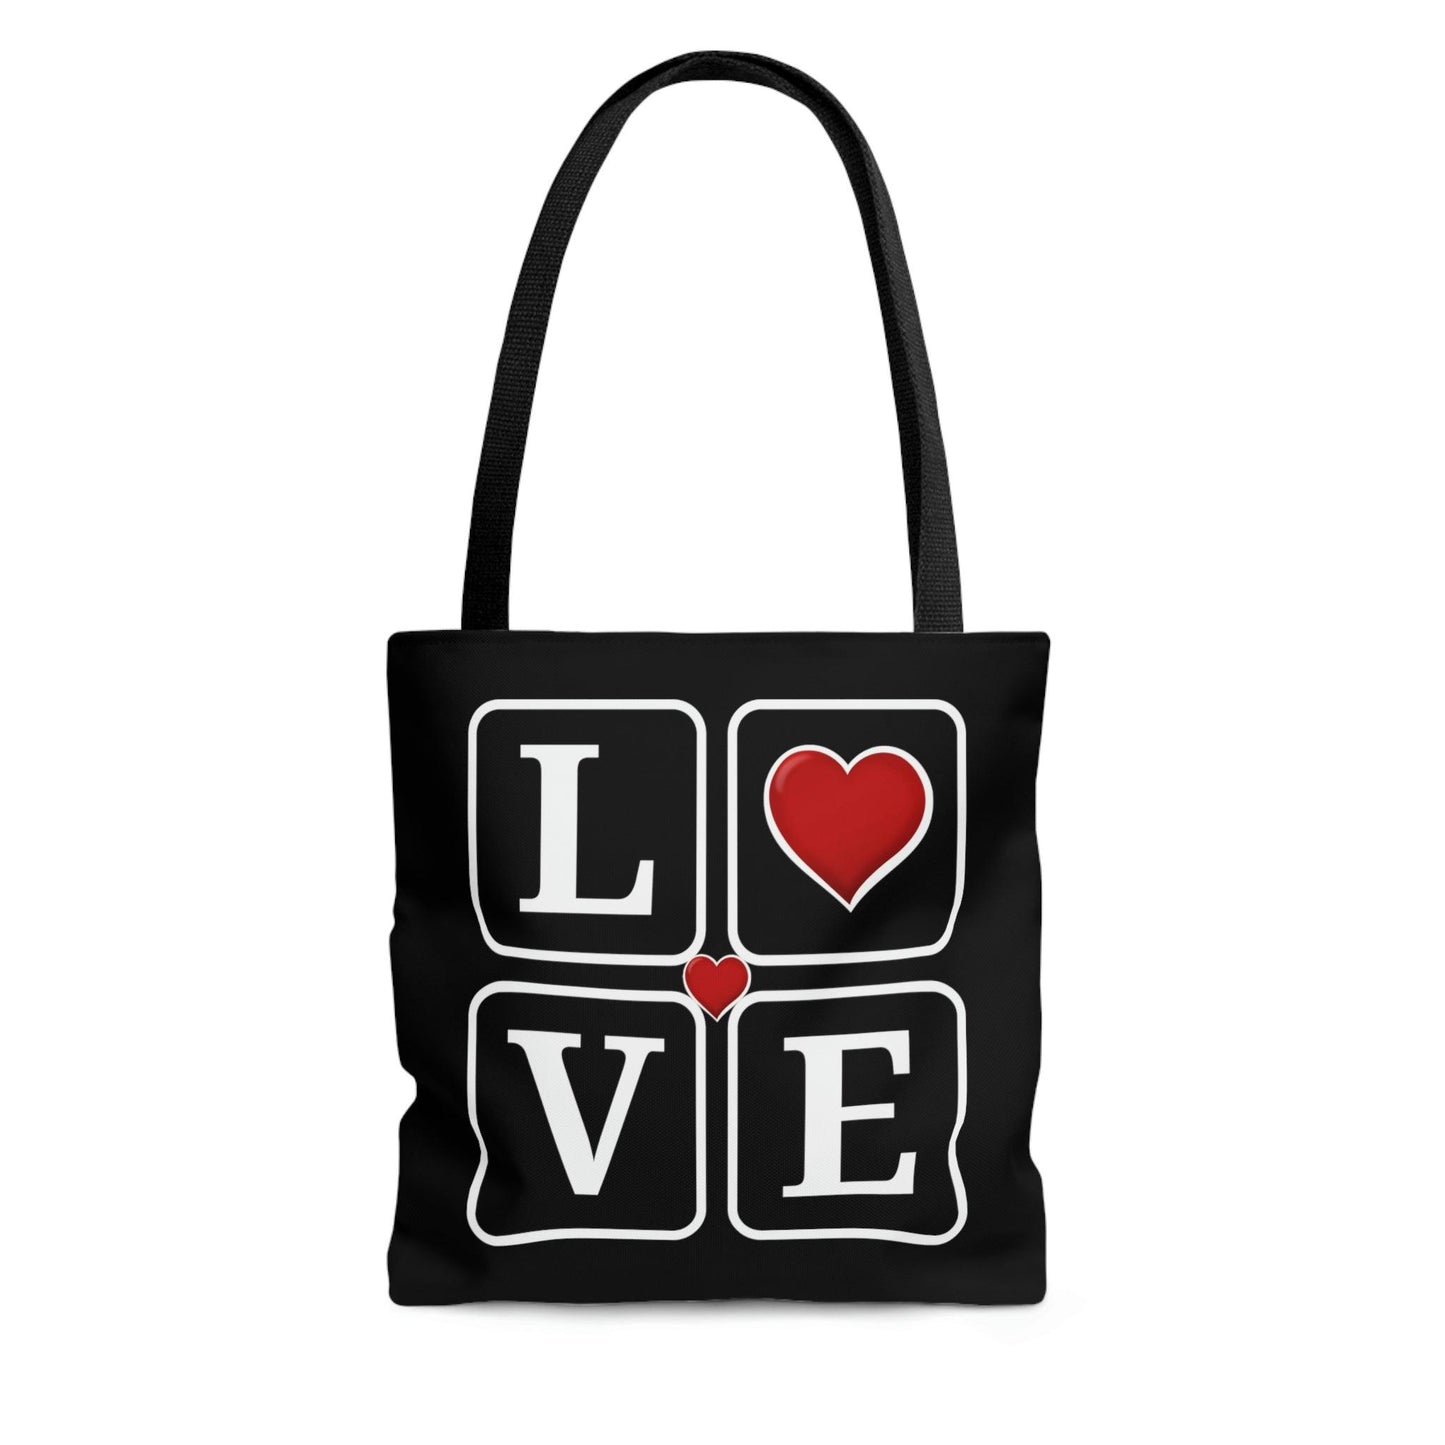 Love Squares with Hearts Tote Bag,